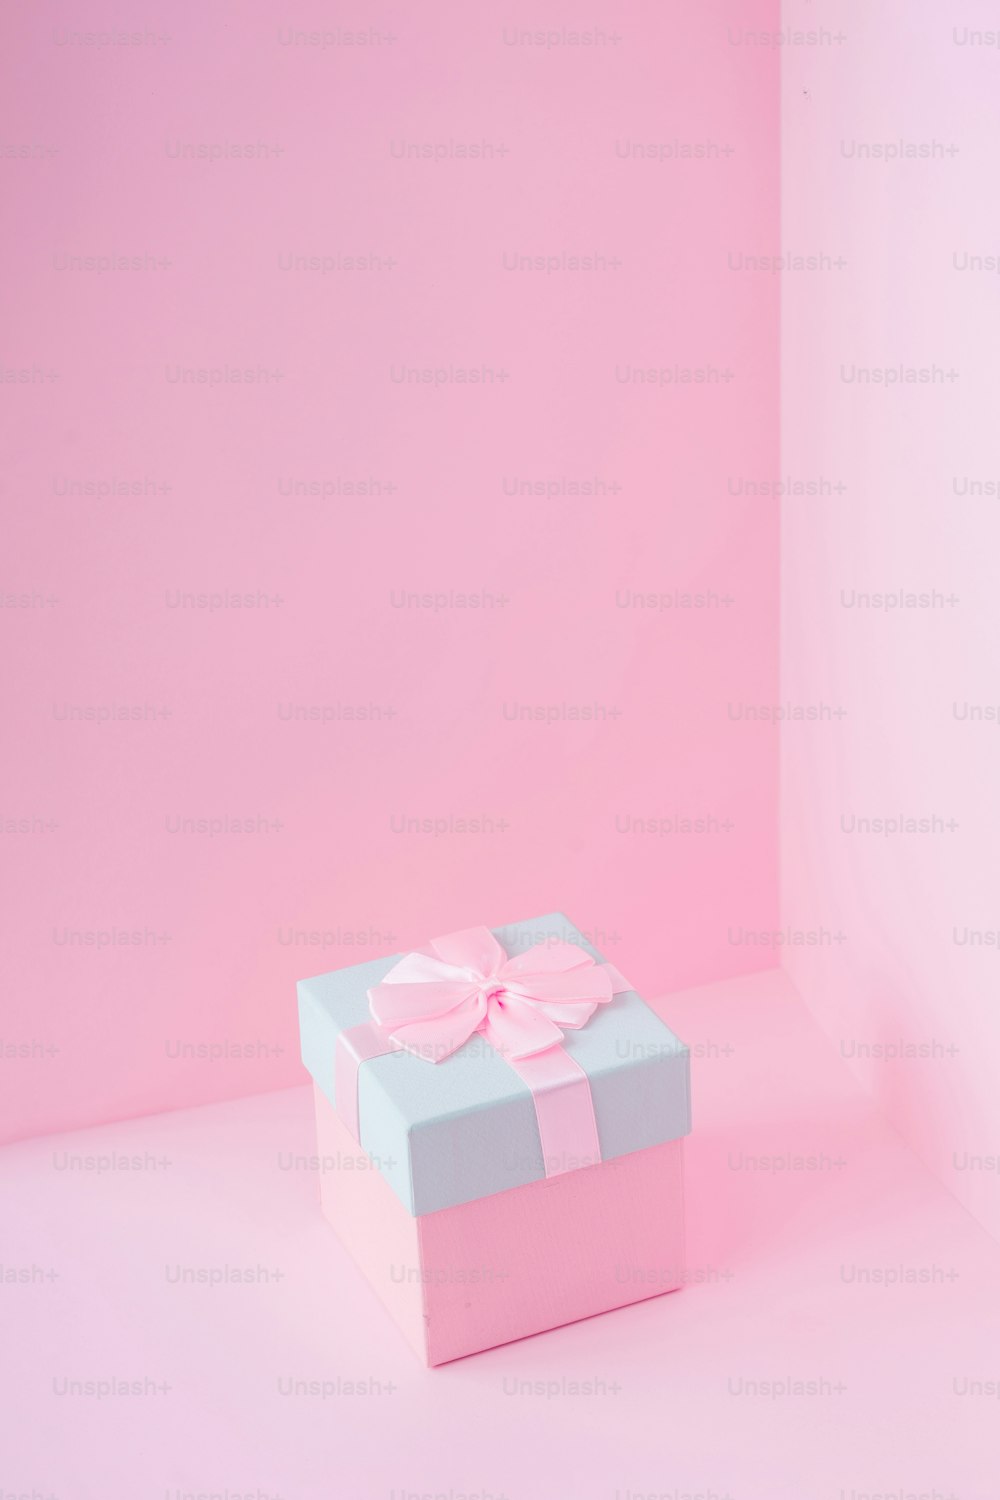 New Year present concept background.